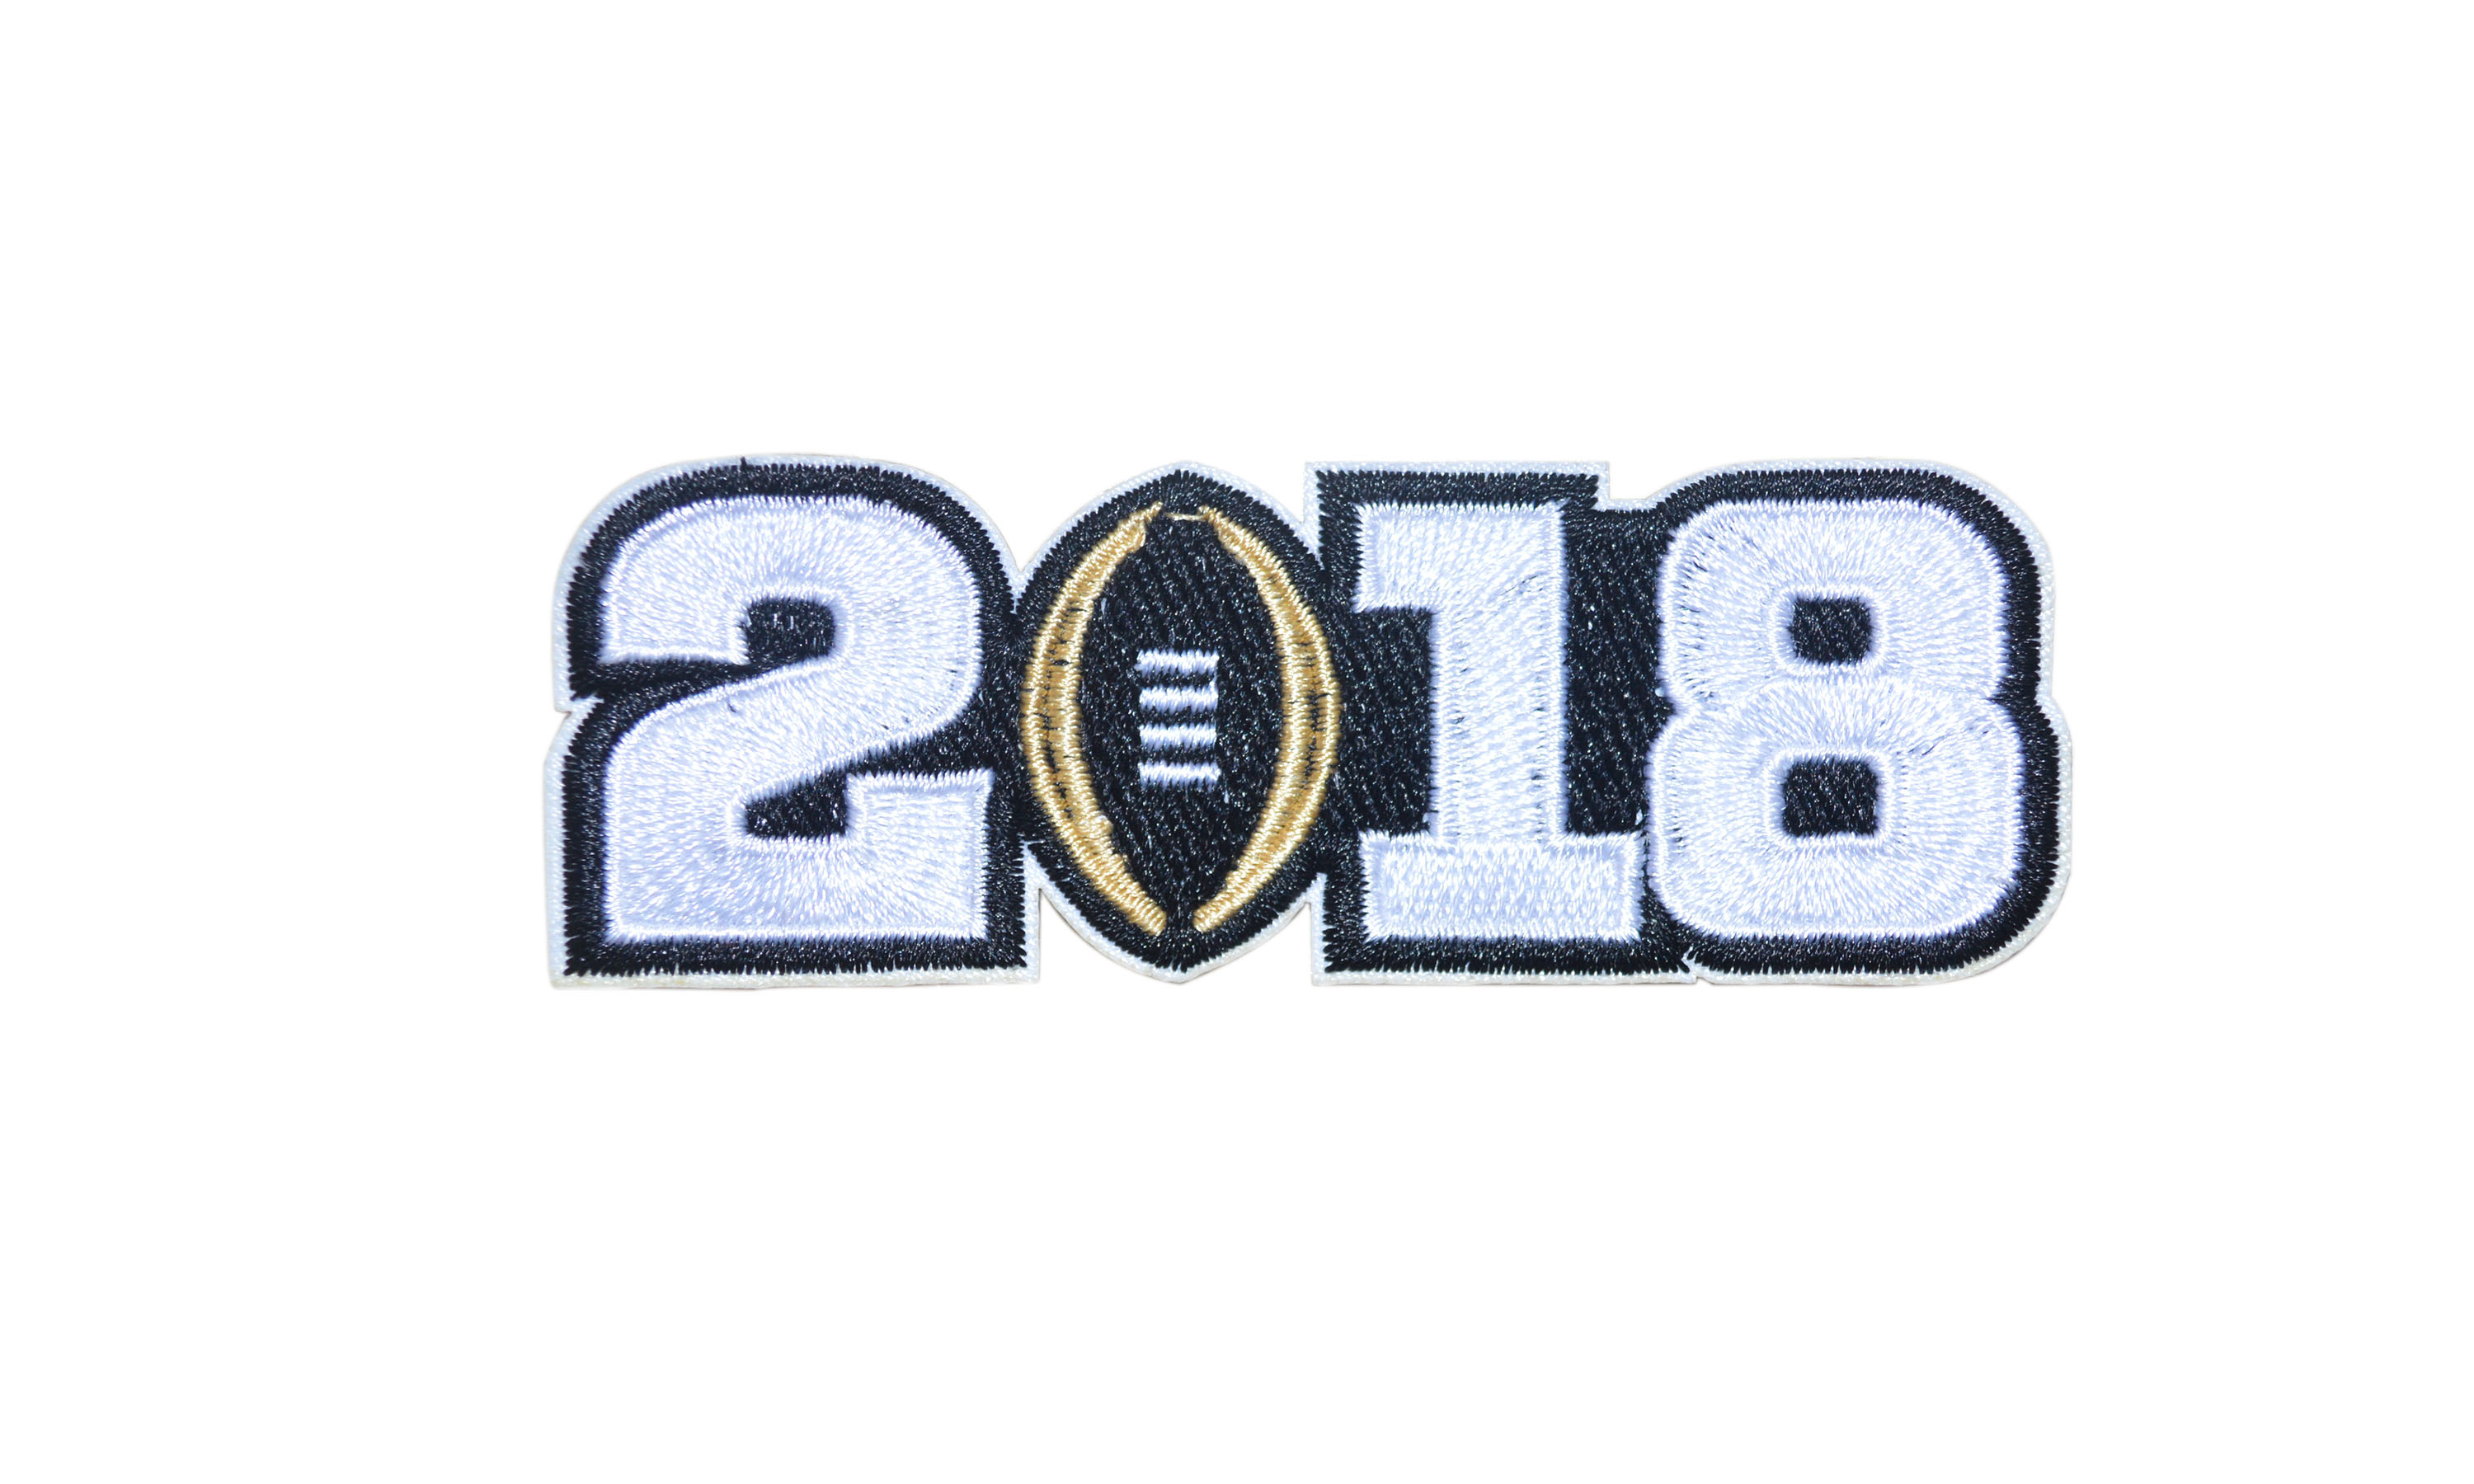 2018 College Football National Championship Patch